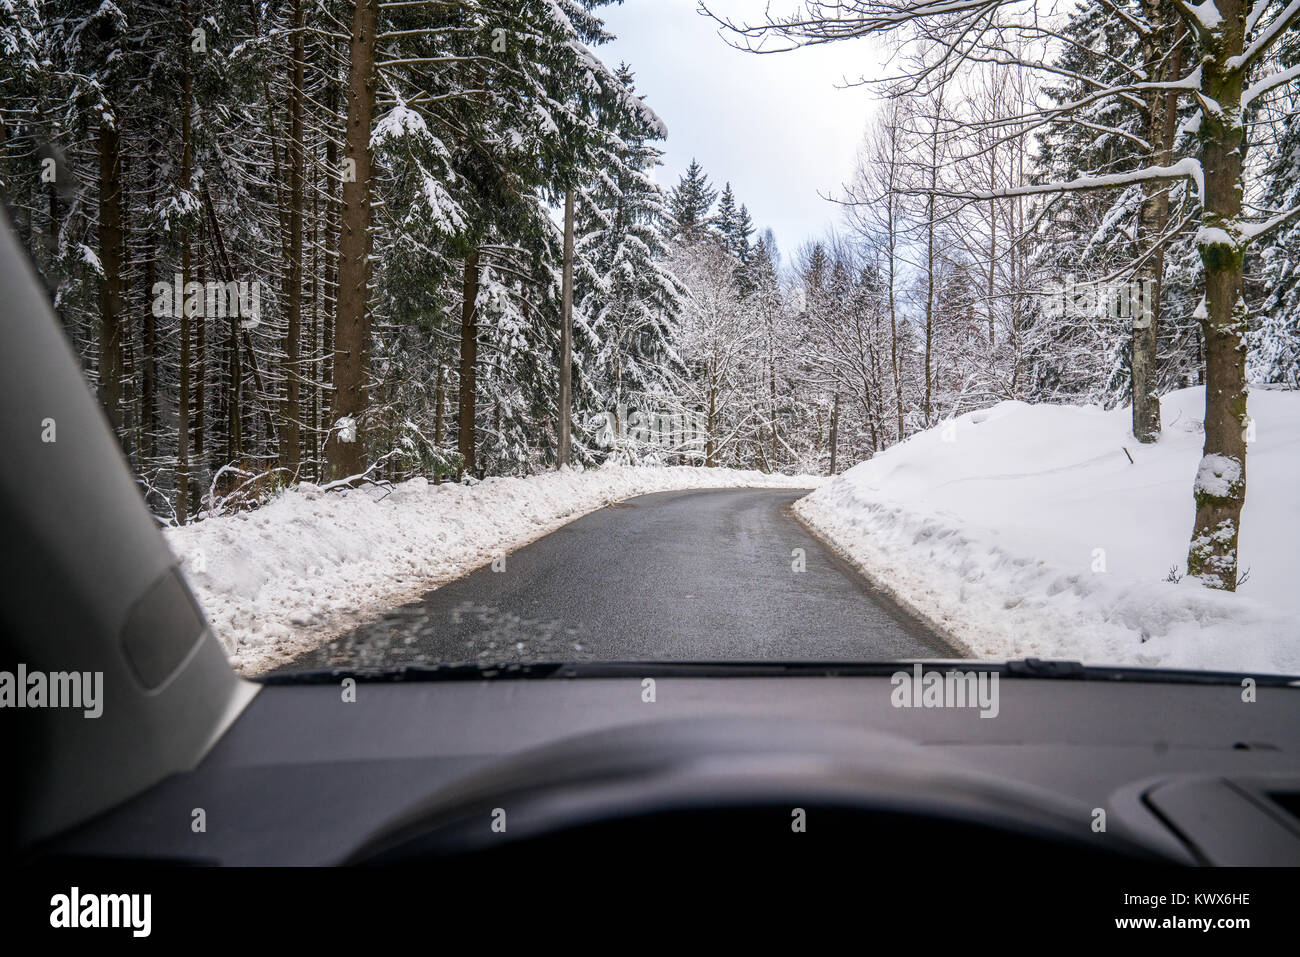 Inside a car on a snowy road in the Harz mountains Stock Photo